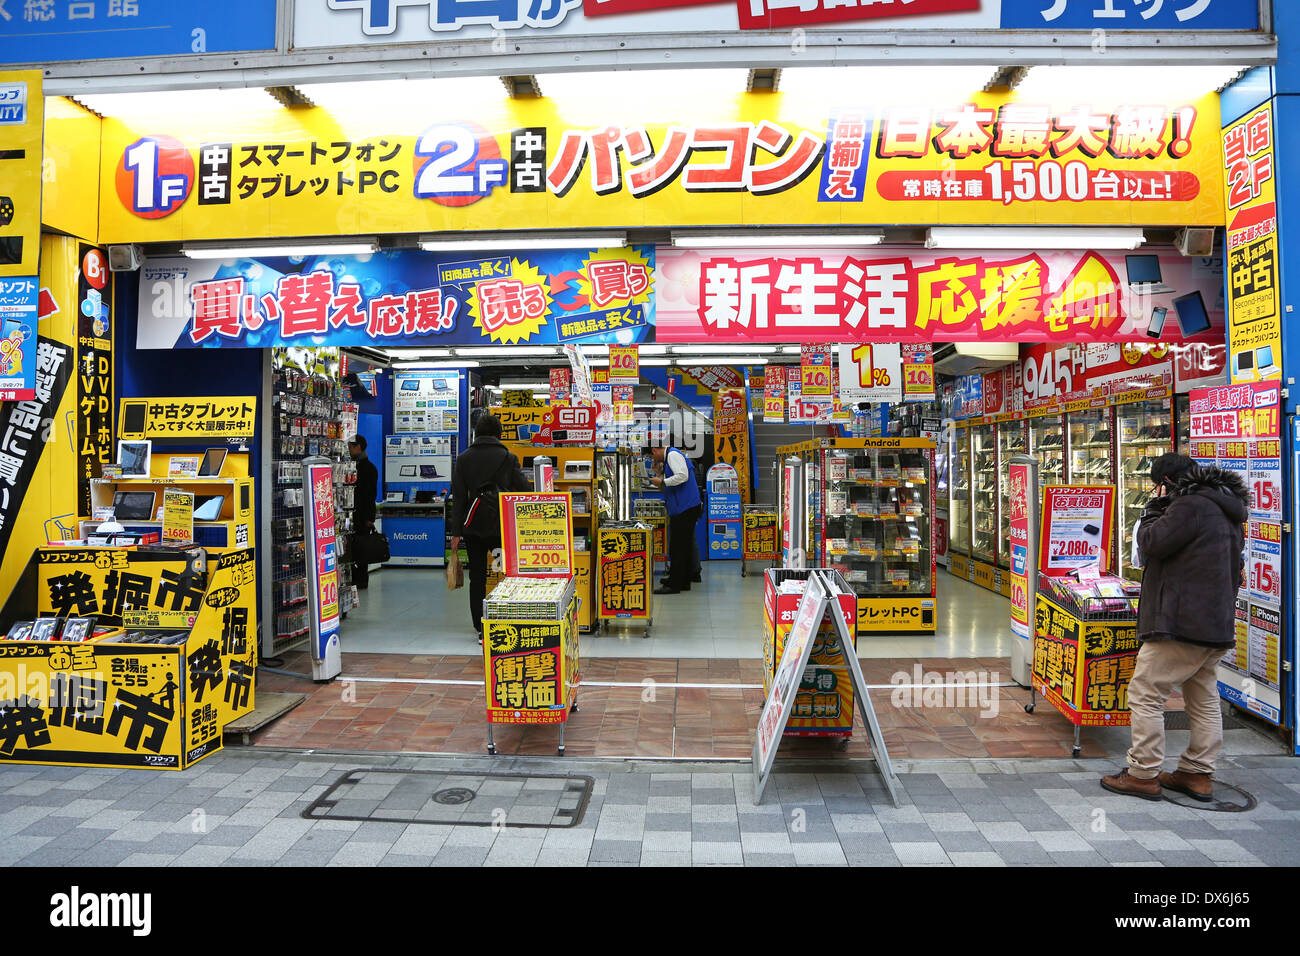 Japanese Dvd Store High Resolution Stock Photography and Images - Alamy